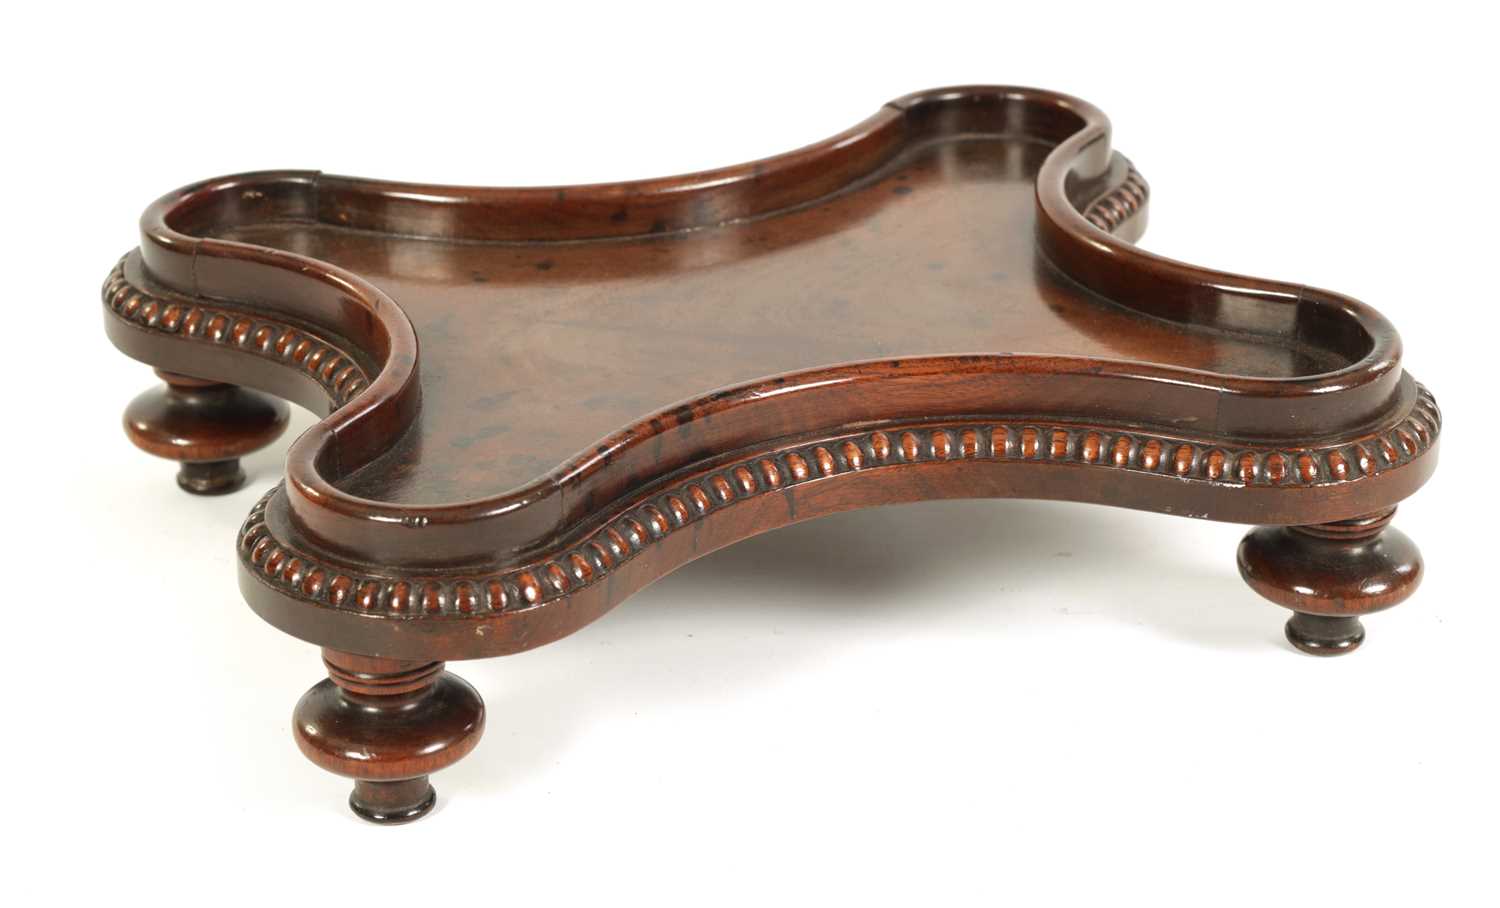 A LATE GEORGIAN MAHOGANY TABLE URN STAND IN THE MANNER OF GILLOWS